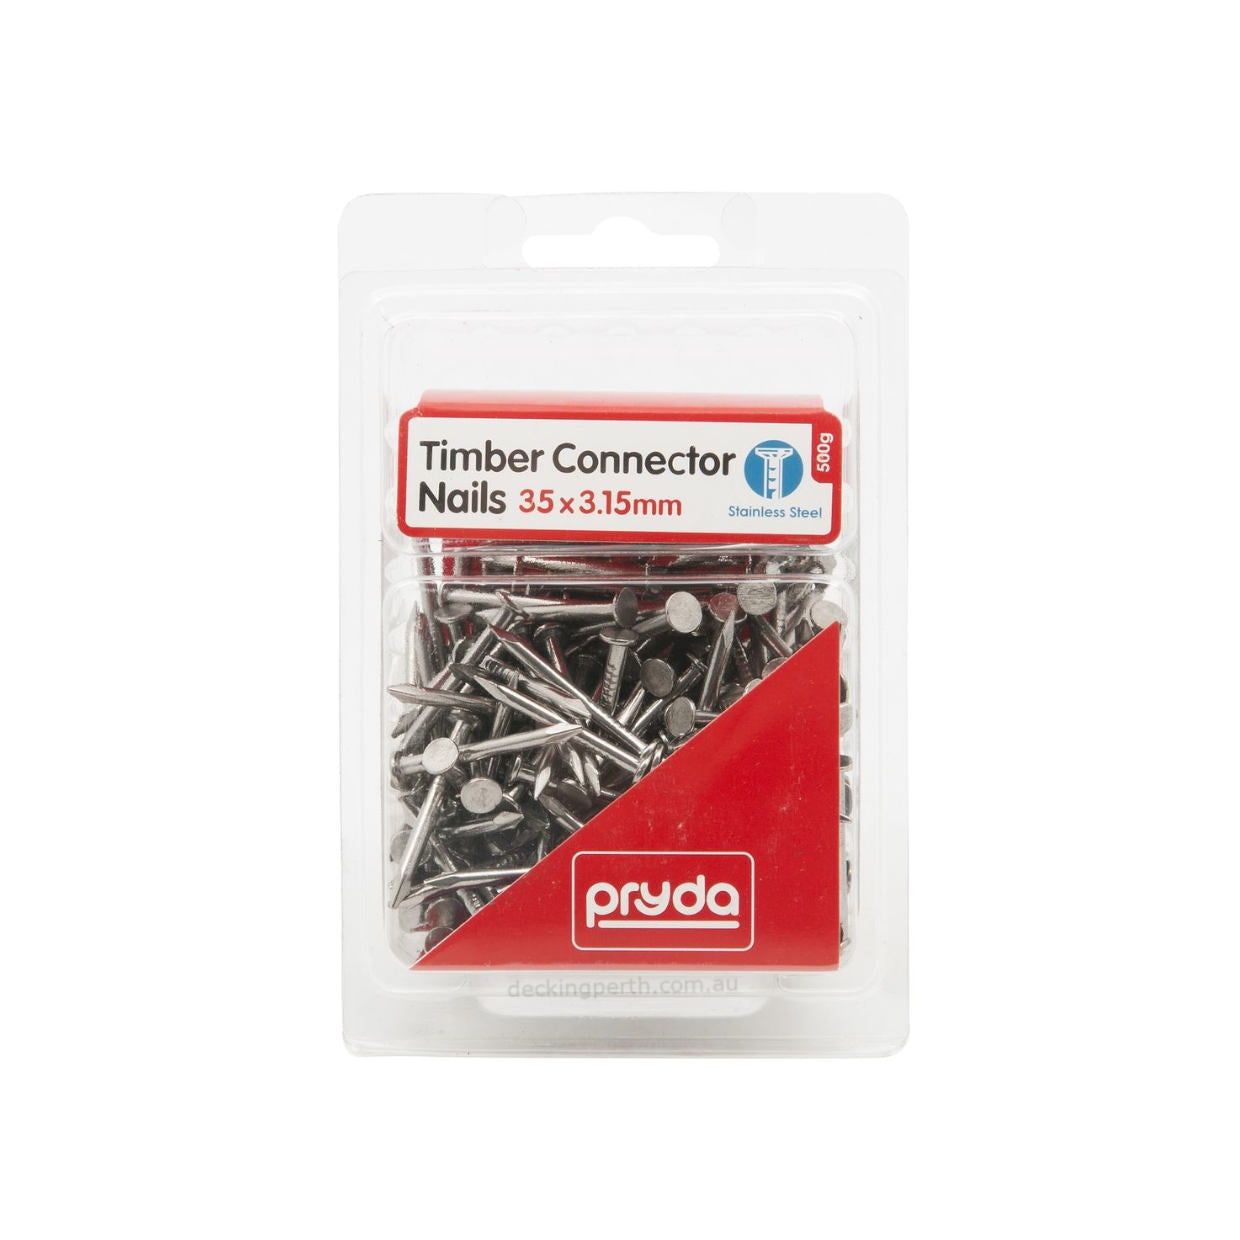 Pryda_316SS_Nail_Connector_35x3.15mm_500g_Decking_Perth_1